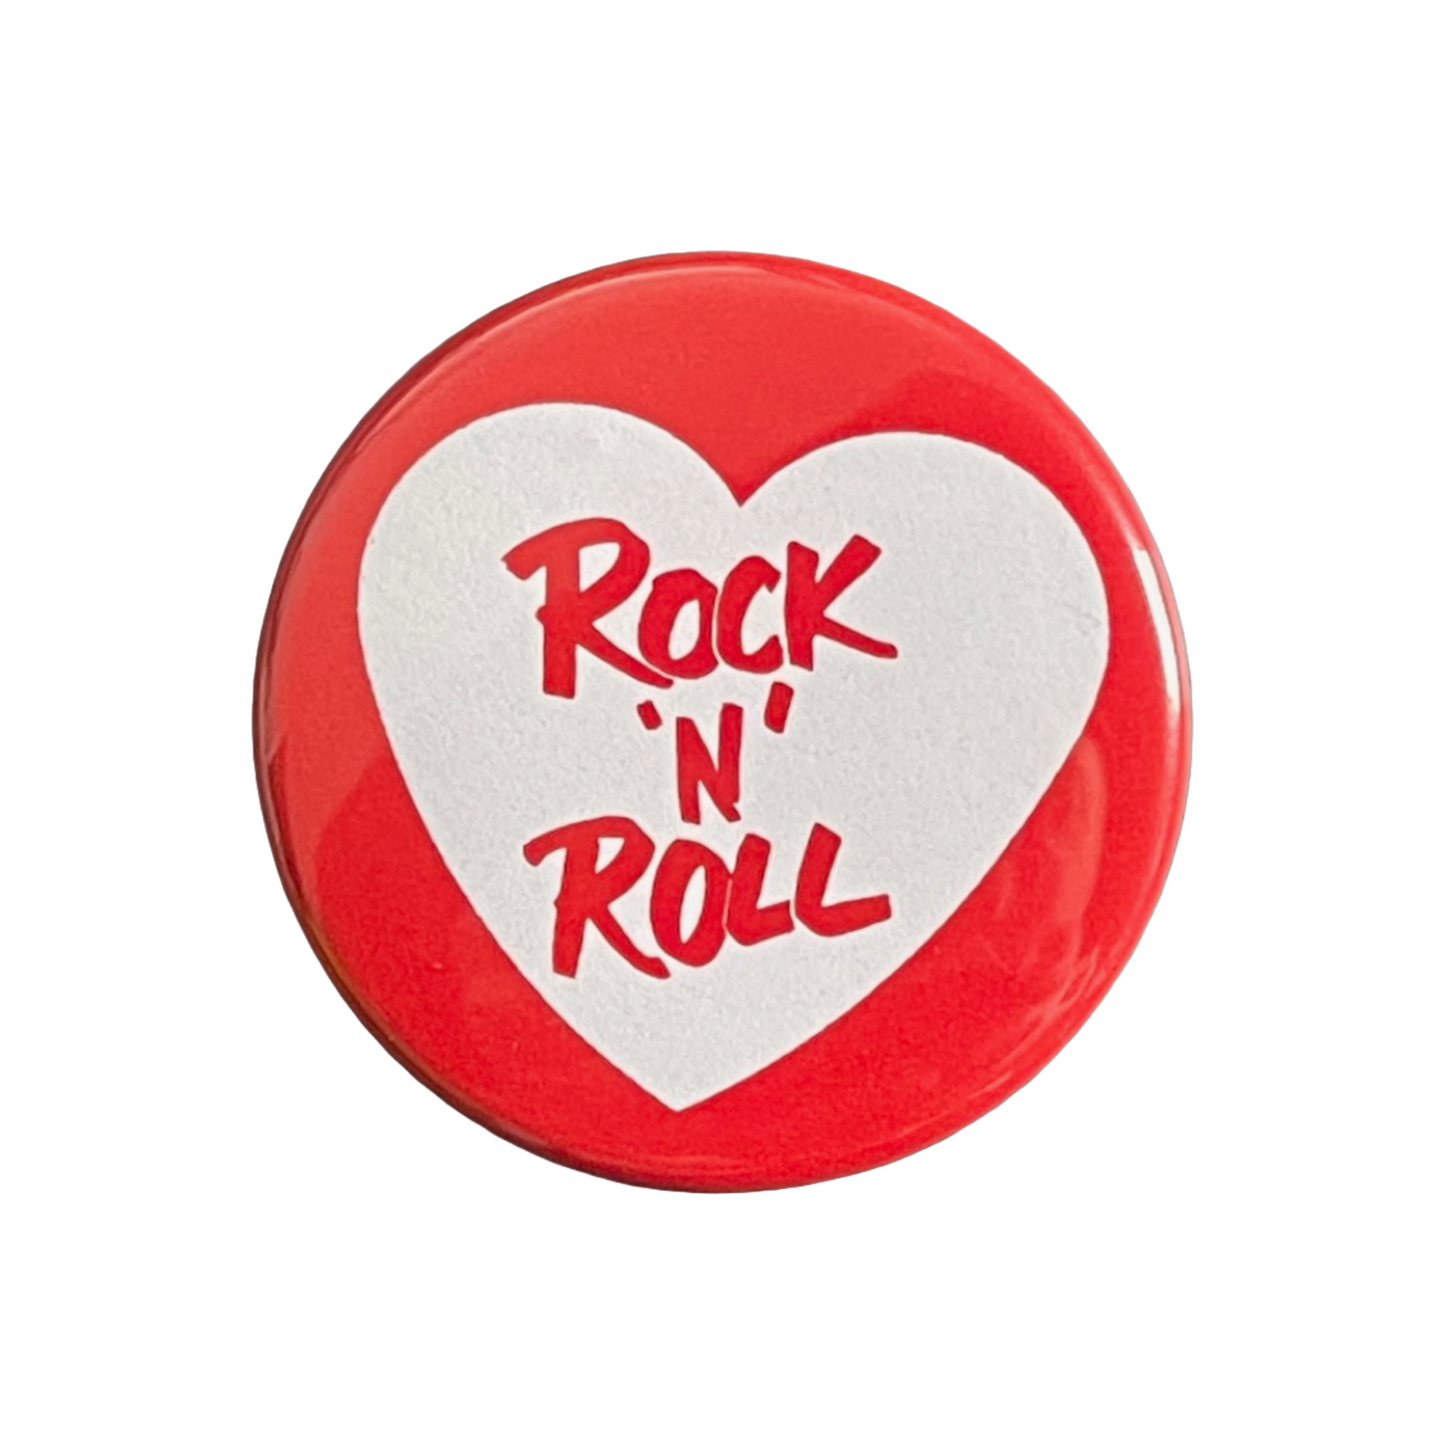 Rock N' Roll Button by World Famous Original